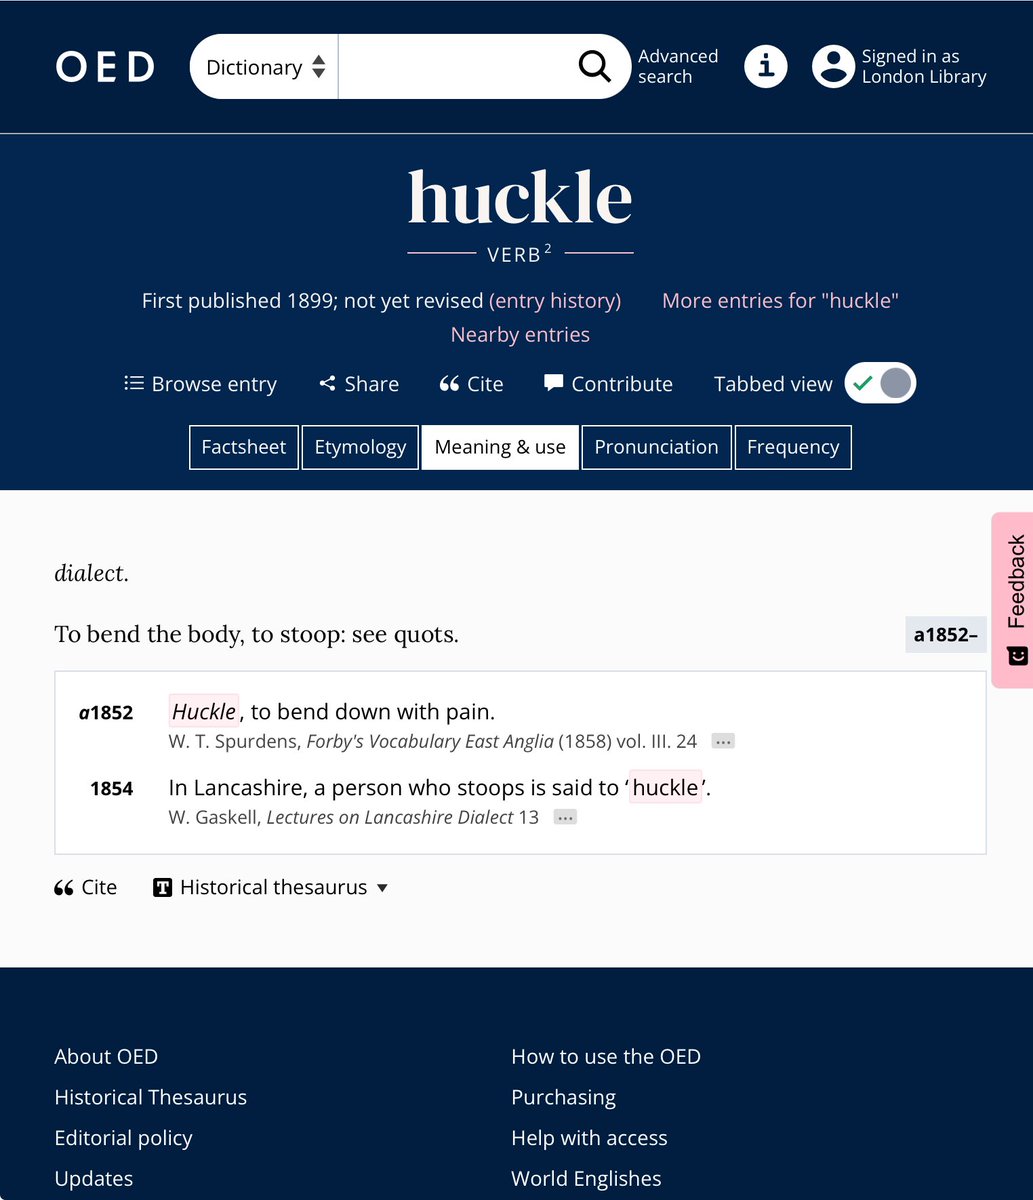 I realize this isn’t the point, but ‘huckled’? The @OED is puzzled too…